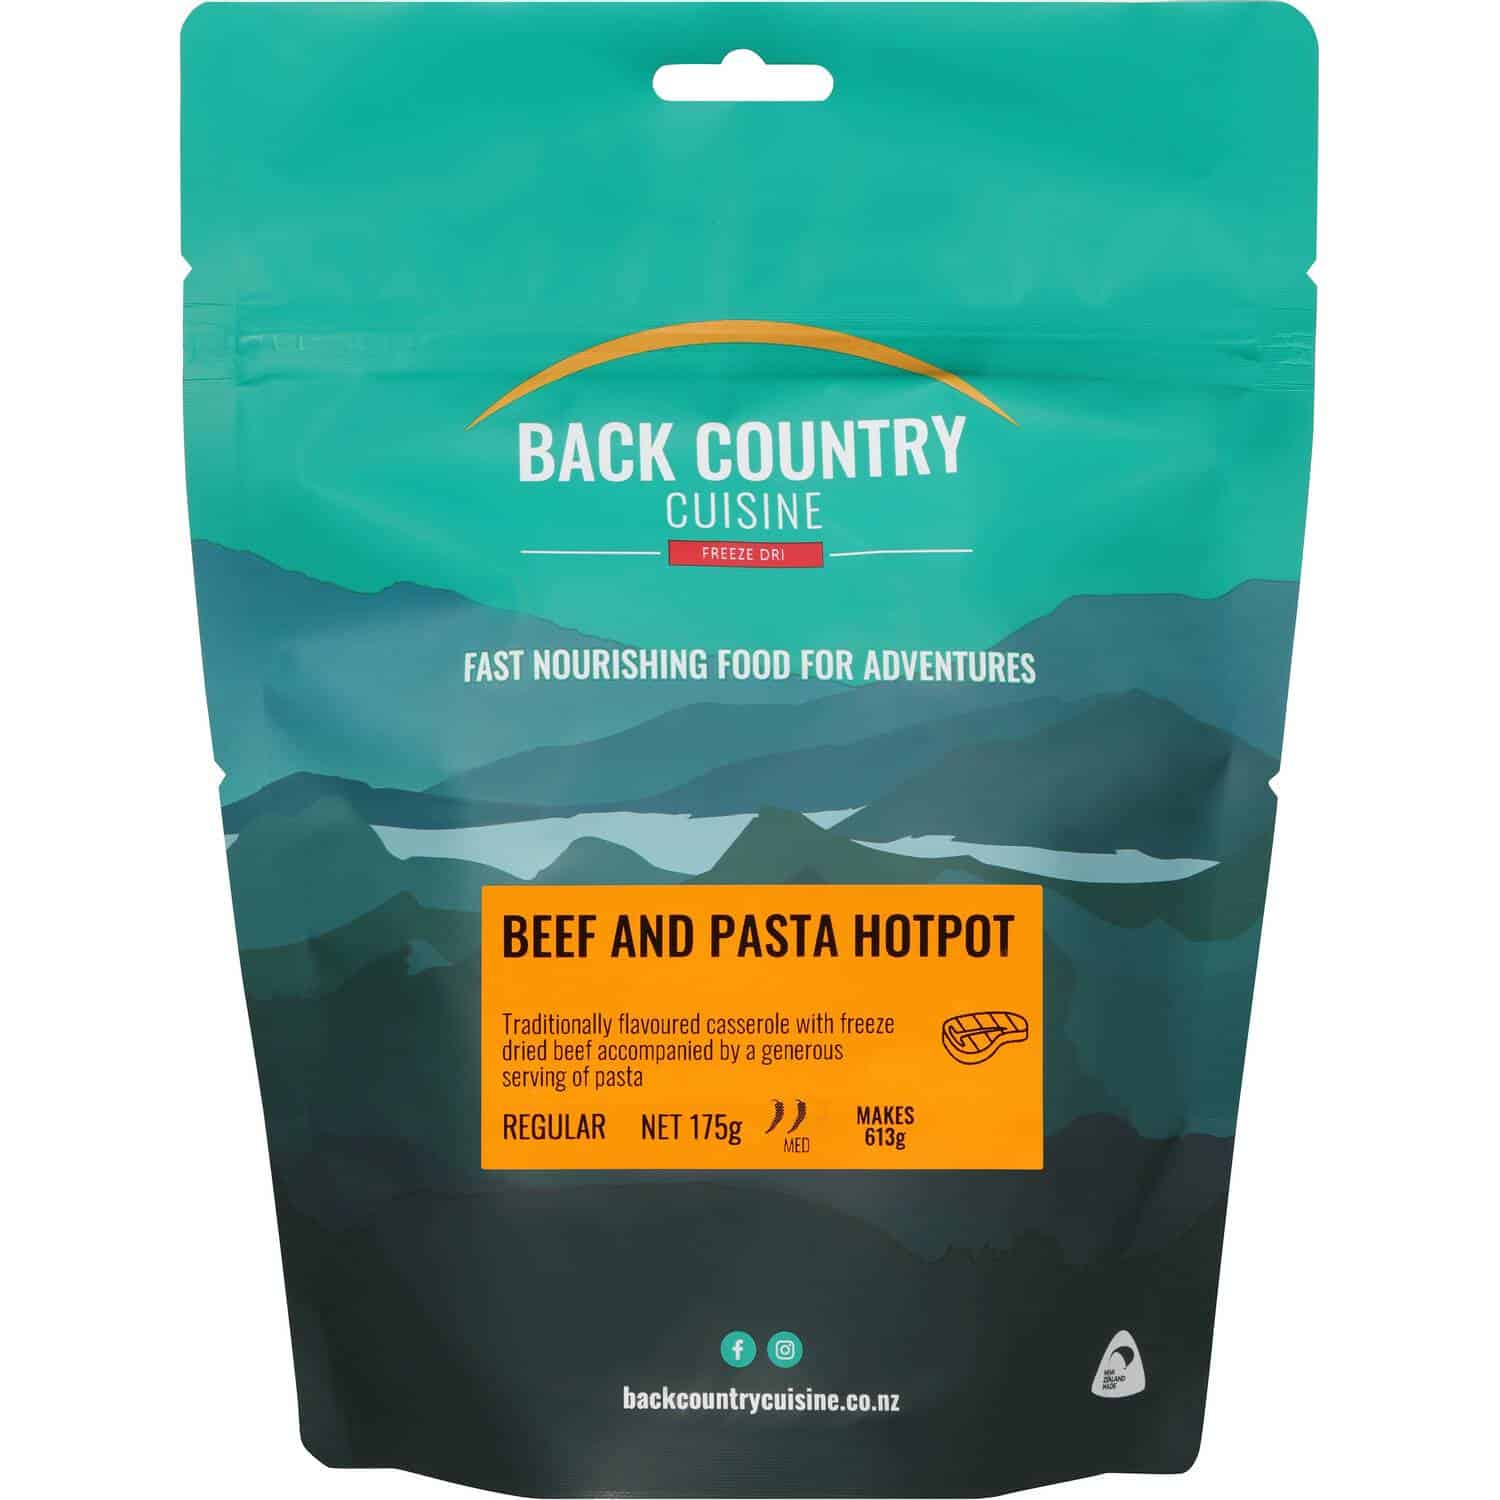 Backcountry Cuisine Beef & Pasta Hotpot Regular - Tramping Food and Accessories sold by Venture Outdoors NZ